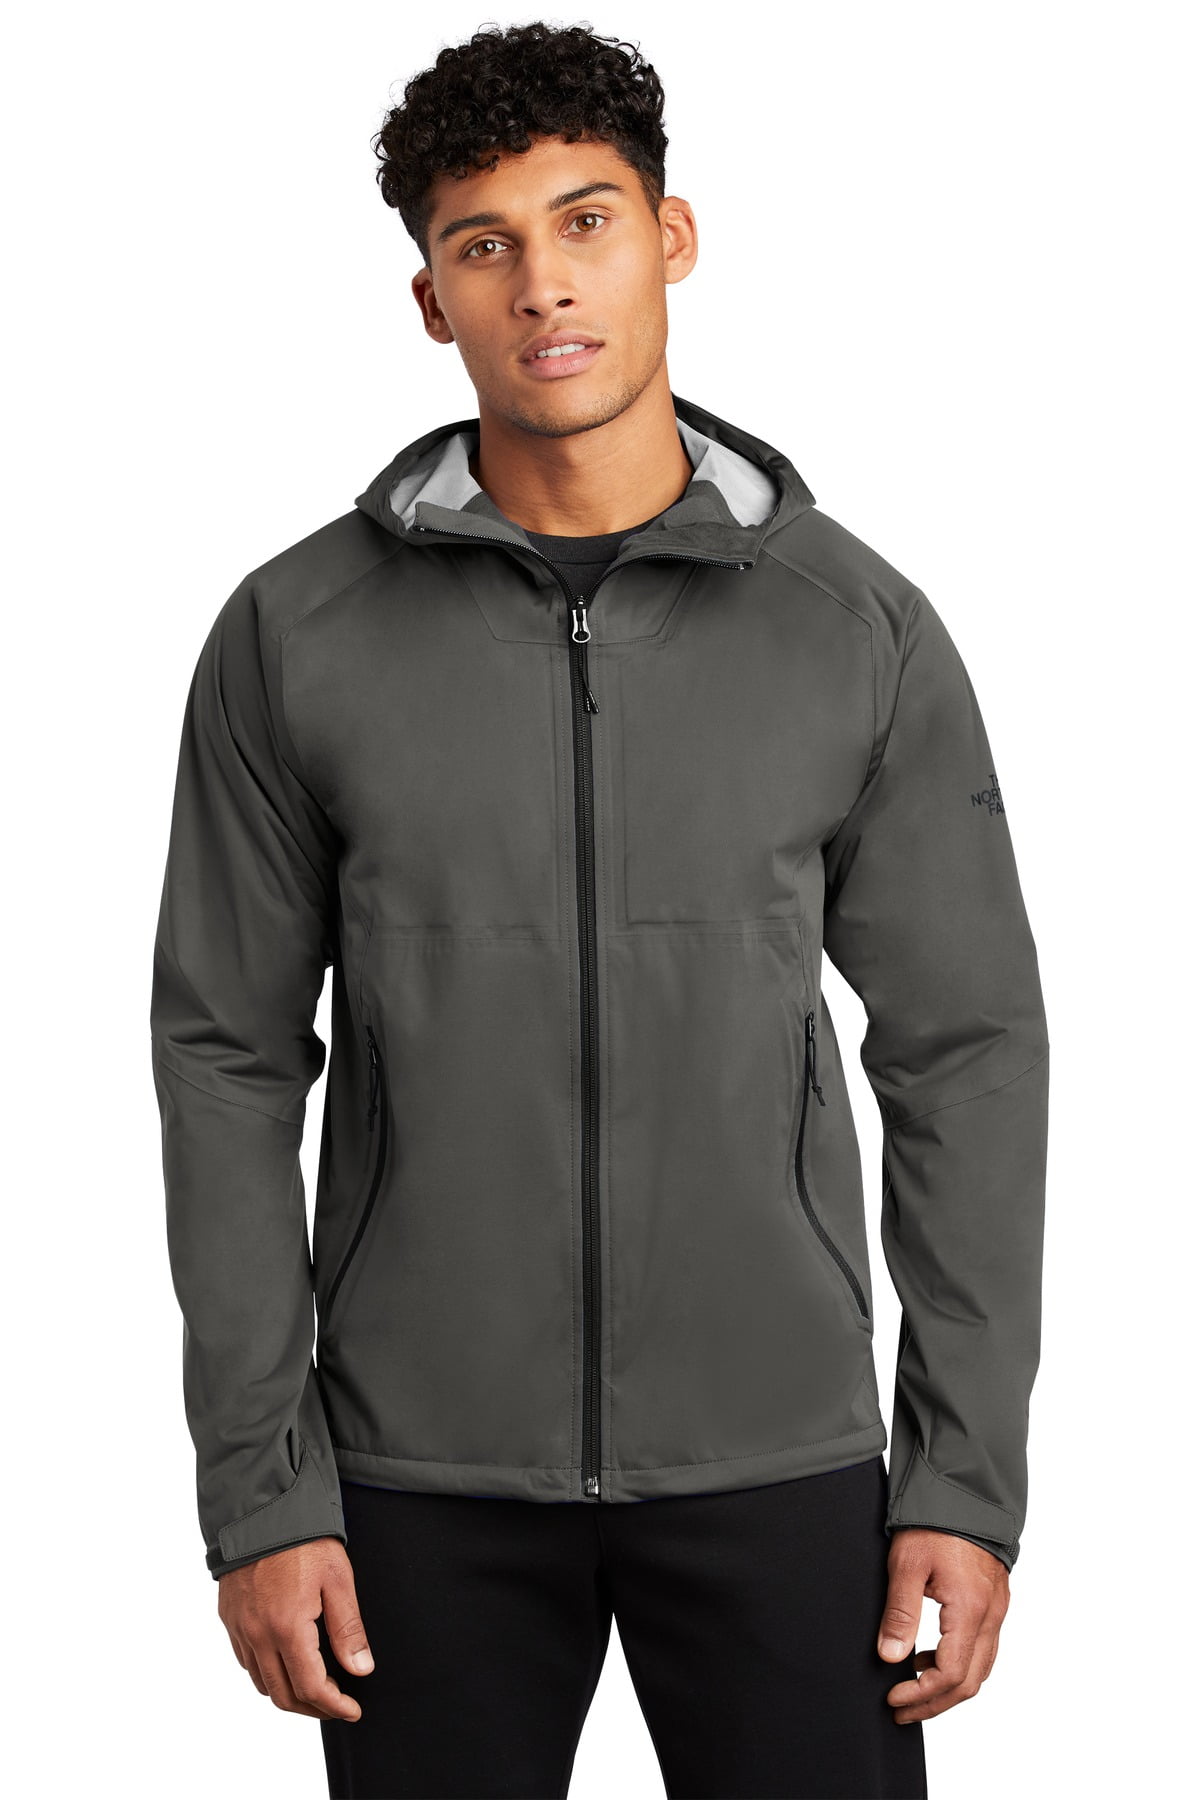 The North Face All-Weather DryVent Stretch Jacket NF0A47FG - Walmart.com